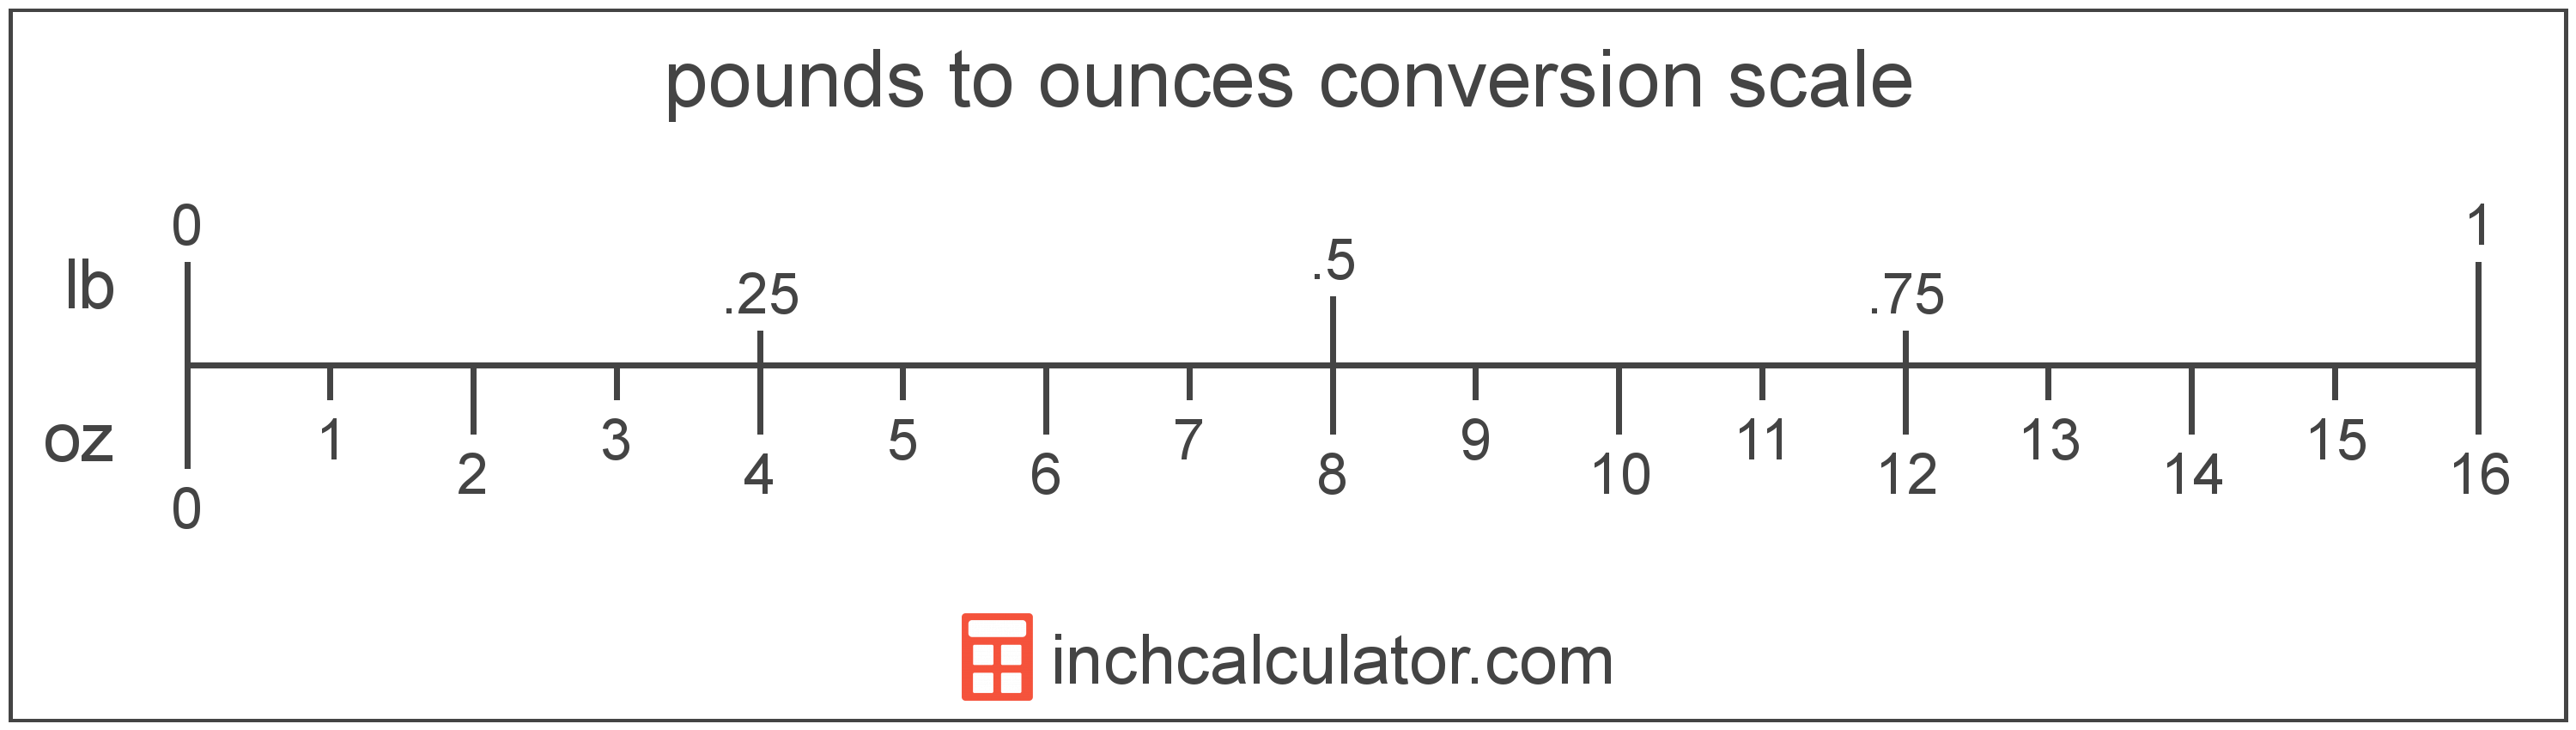 https://www.inchcalculator.com/a/img/unit-conversion/pound-to-ounce-conversion-scale.png